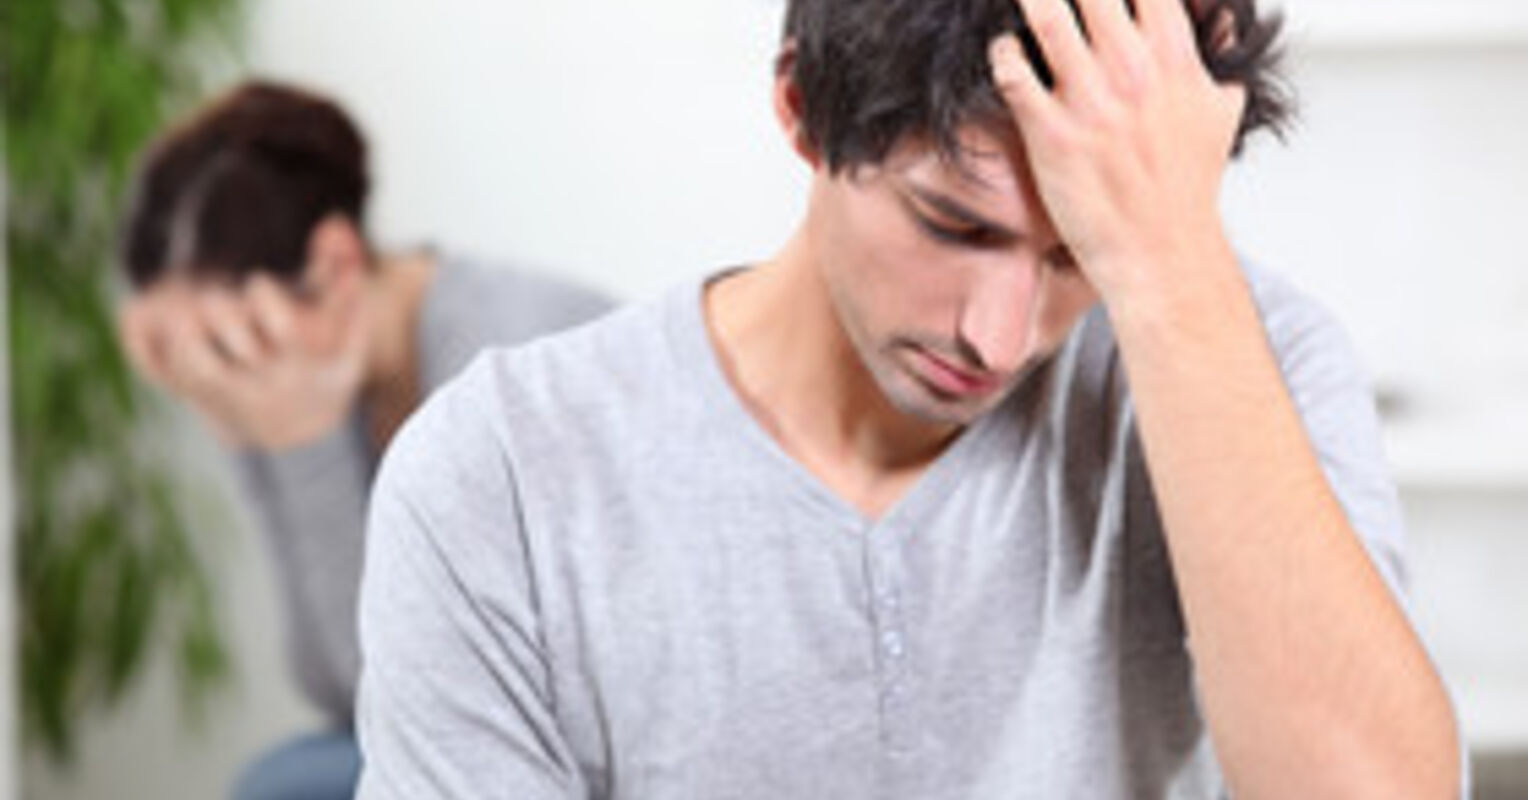 Recovery From an Affair: What Both Spouses Need To Heal | Psychology Today